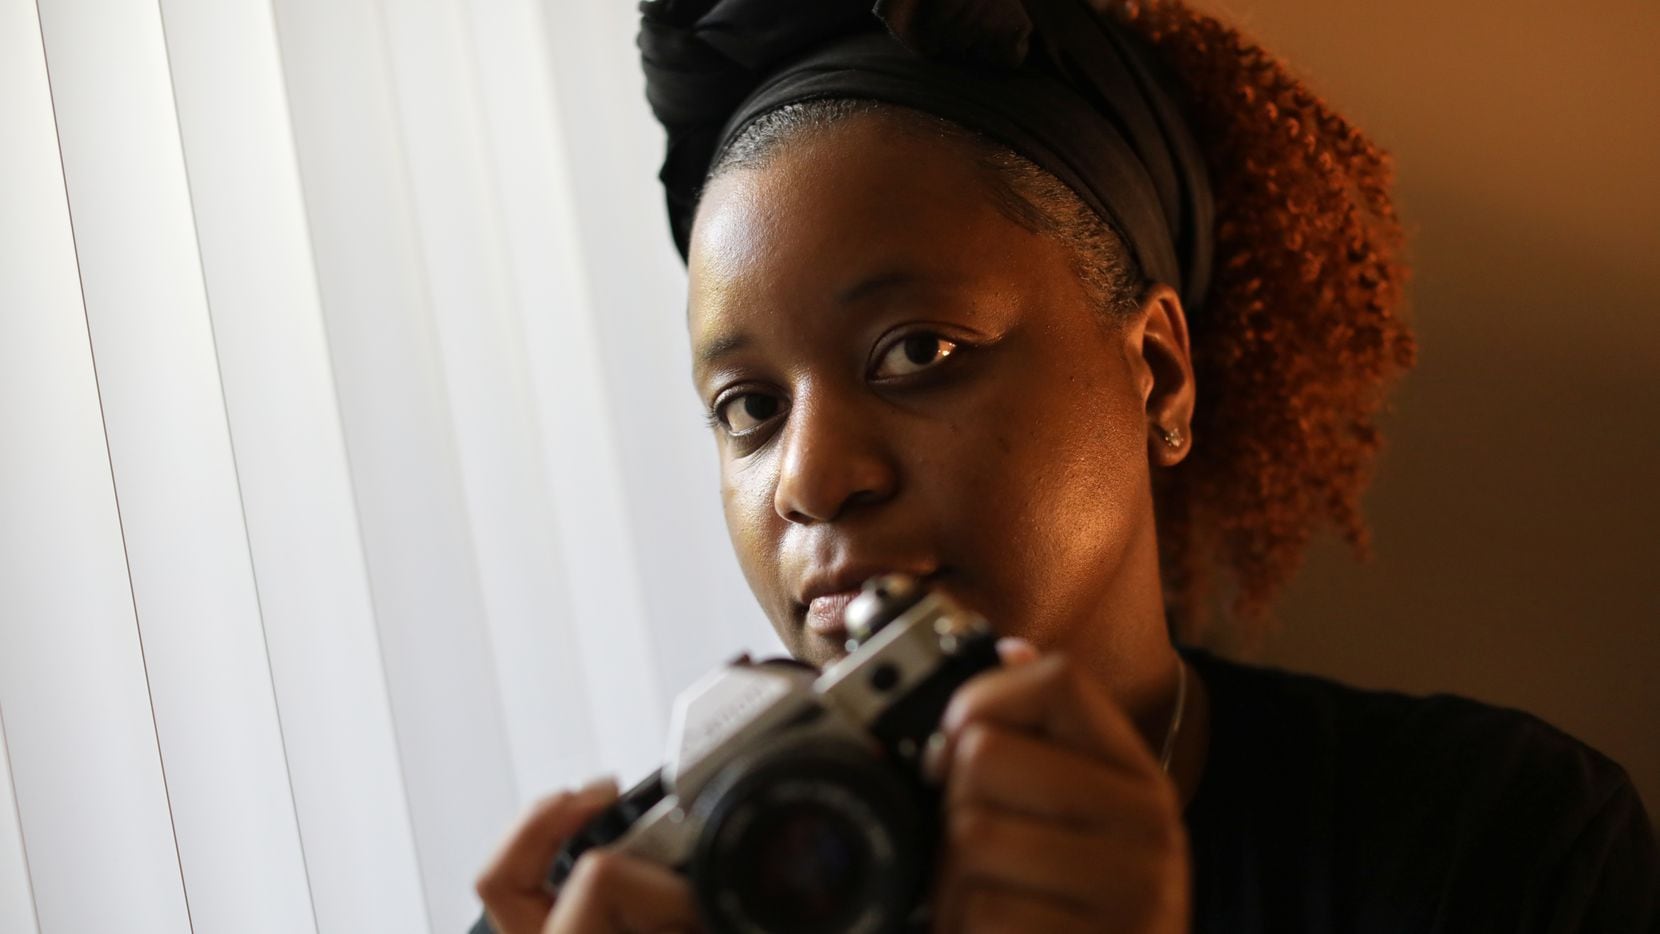 Nitashia Johnson is a multimedia artist. She had a 2020 residency with the Juanita Craft House, with support from the South Dallas Cultural Center, that led to the project, "The Beauty of South Dallas."